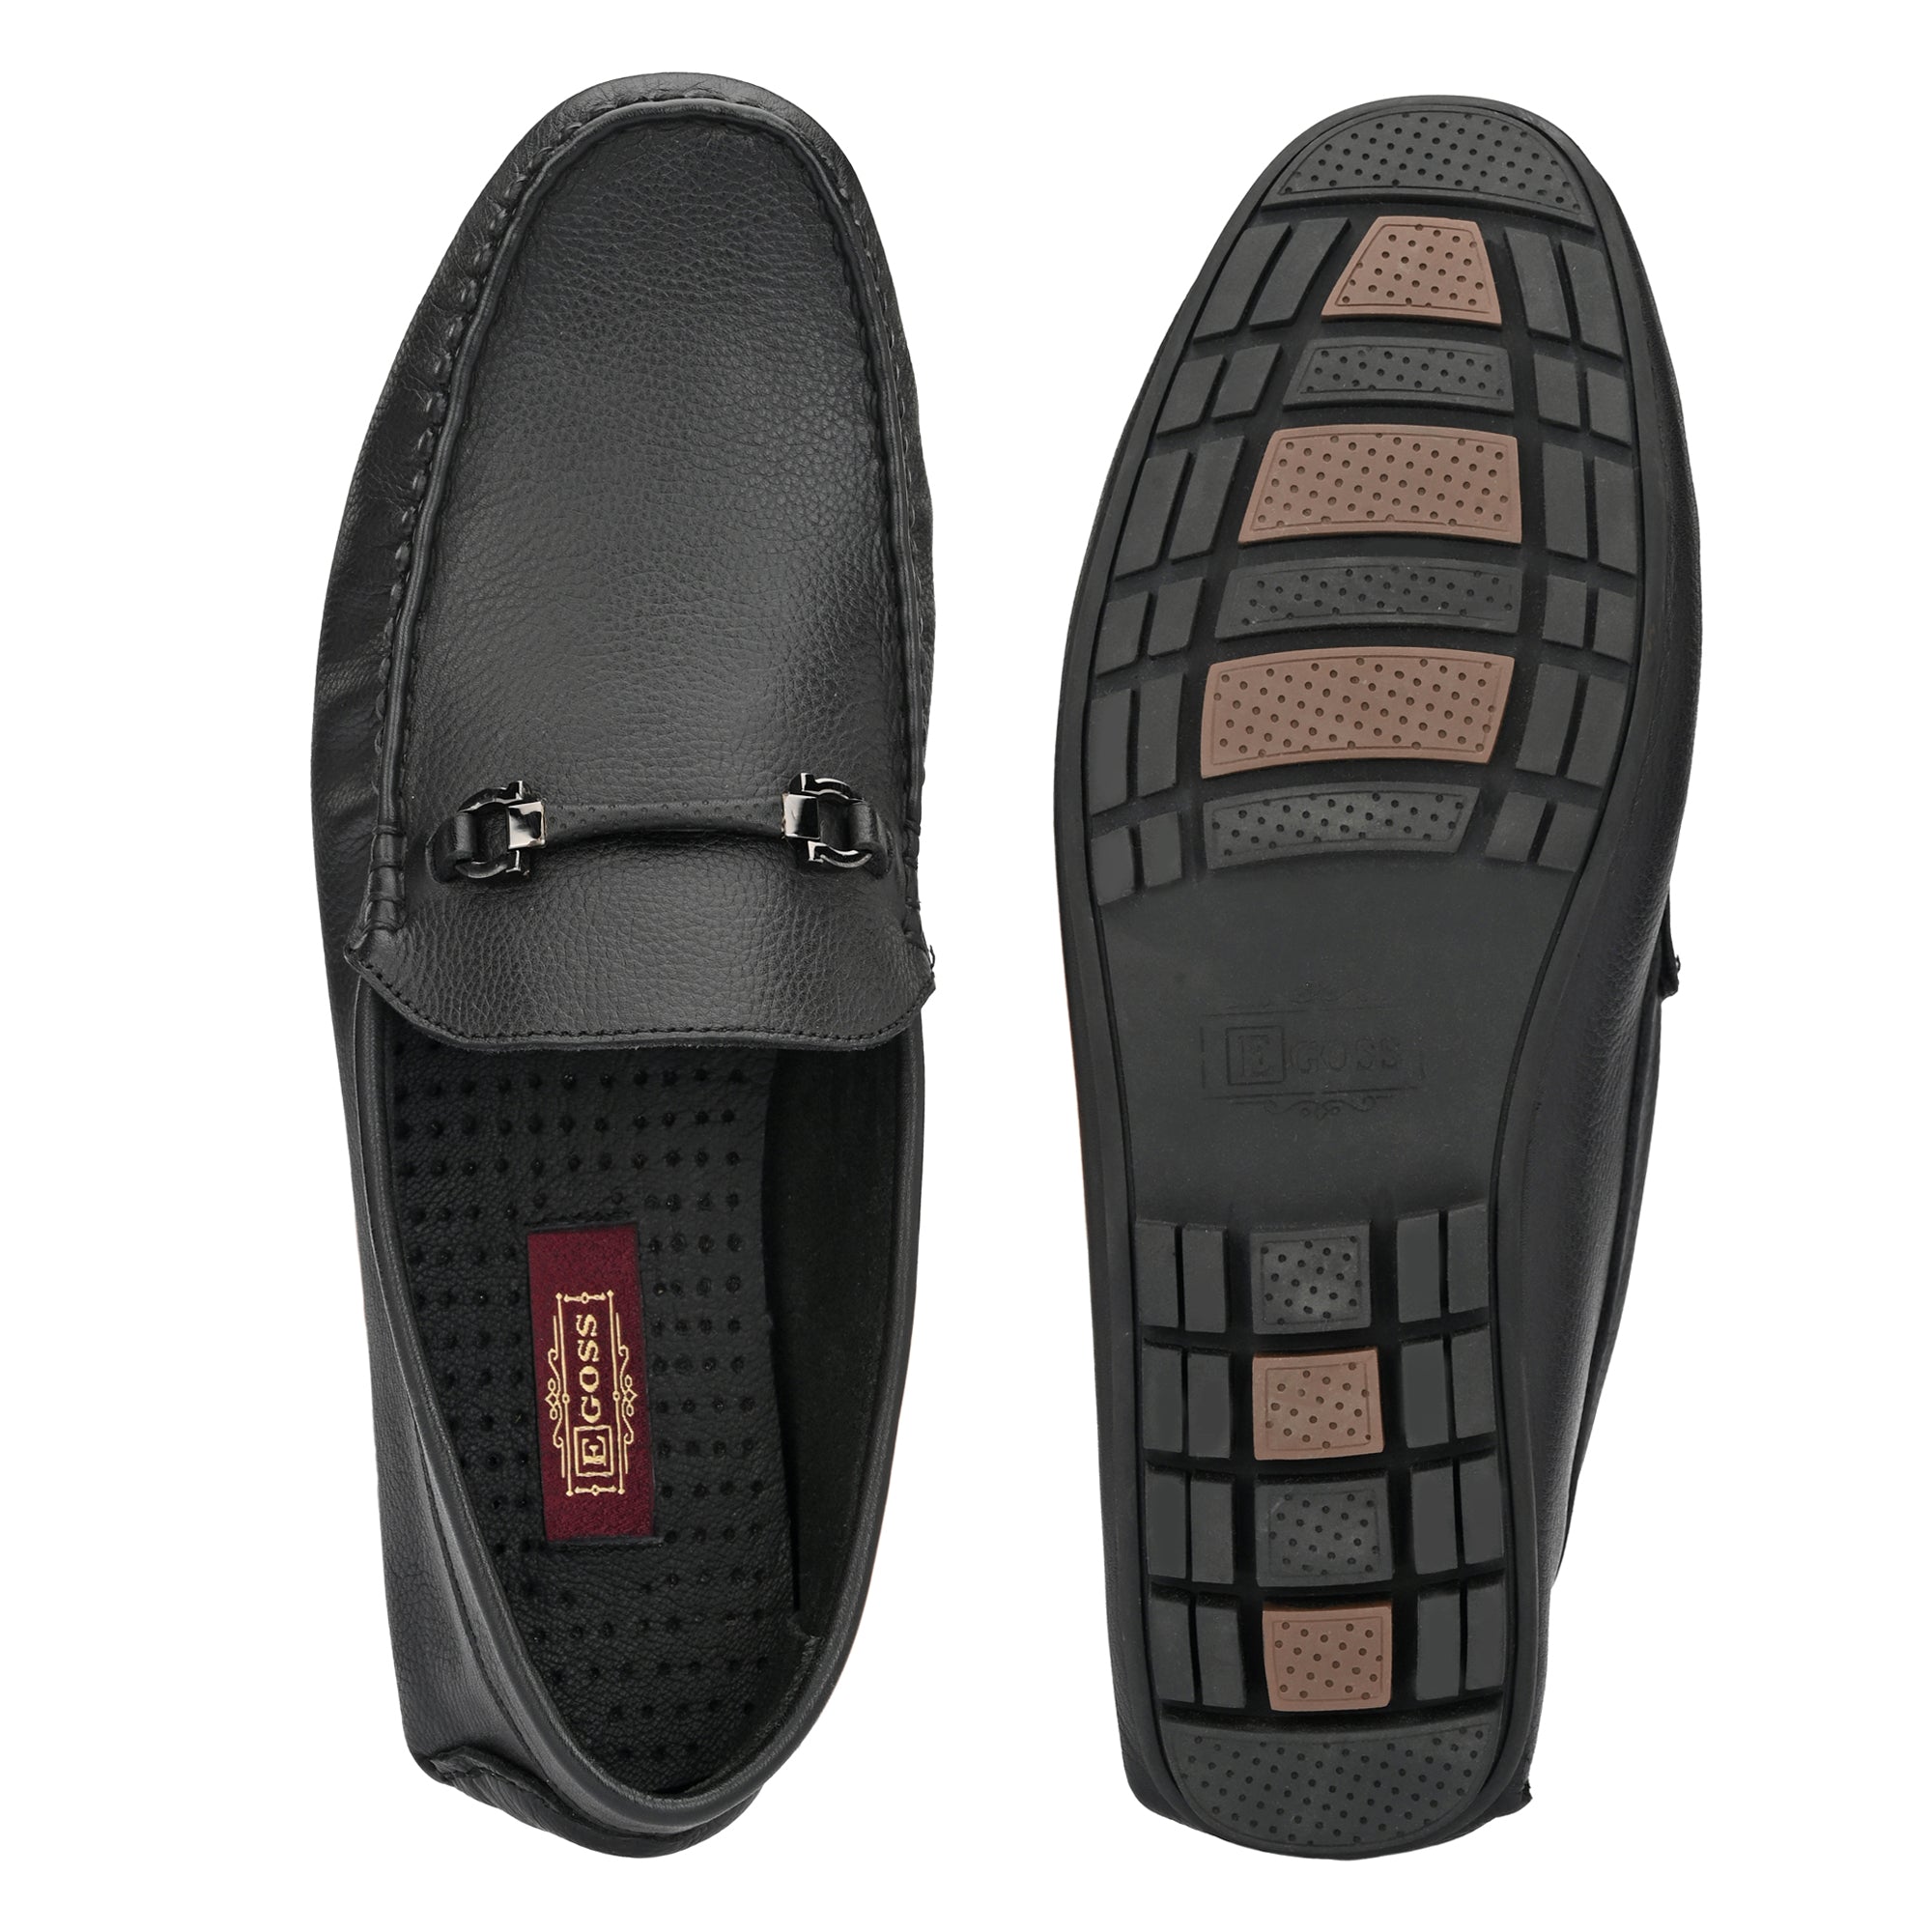 Egoss Leather Casual Slip on Shoes Loafers For Men